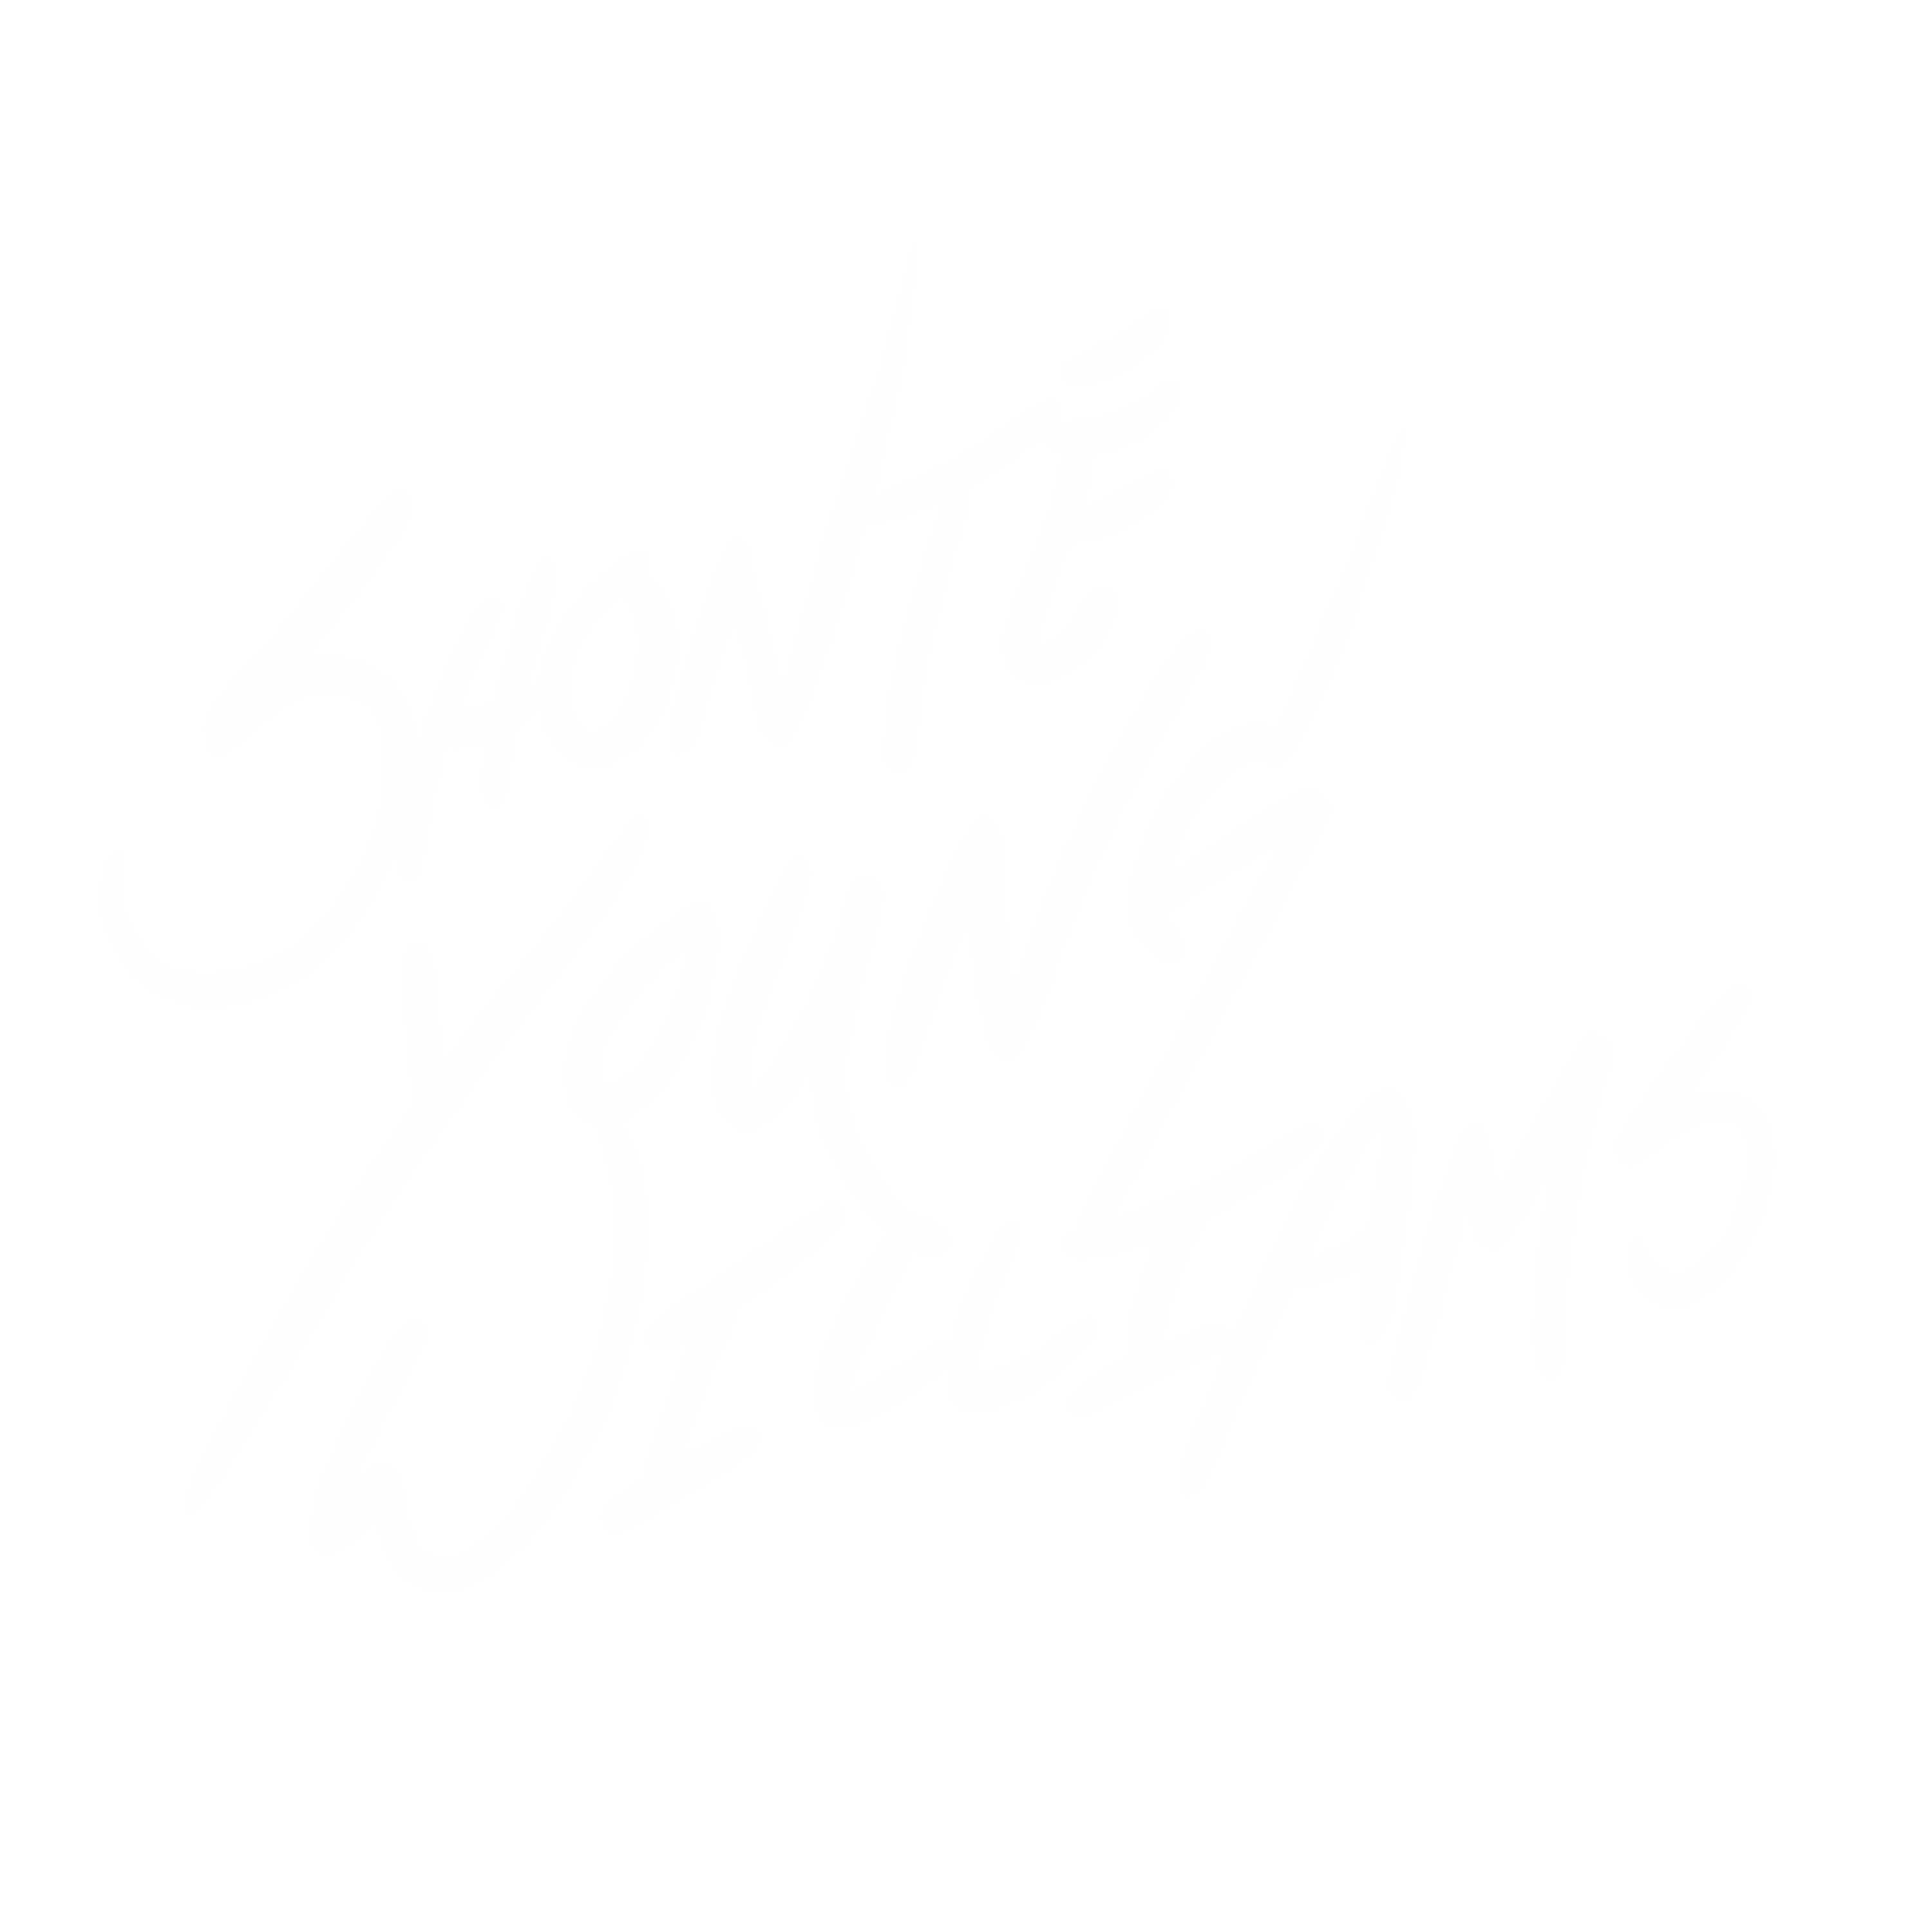 Shonte Young Williams  Home